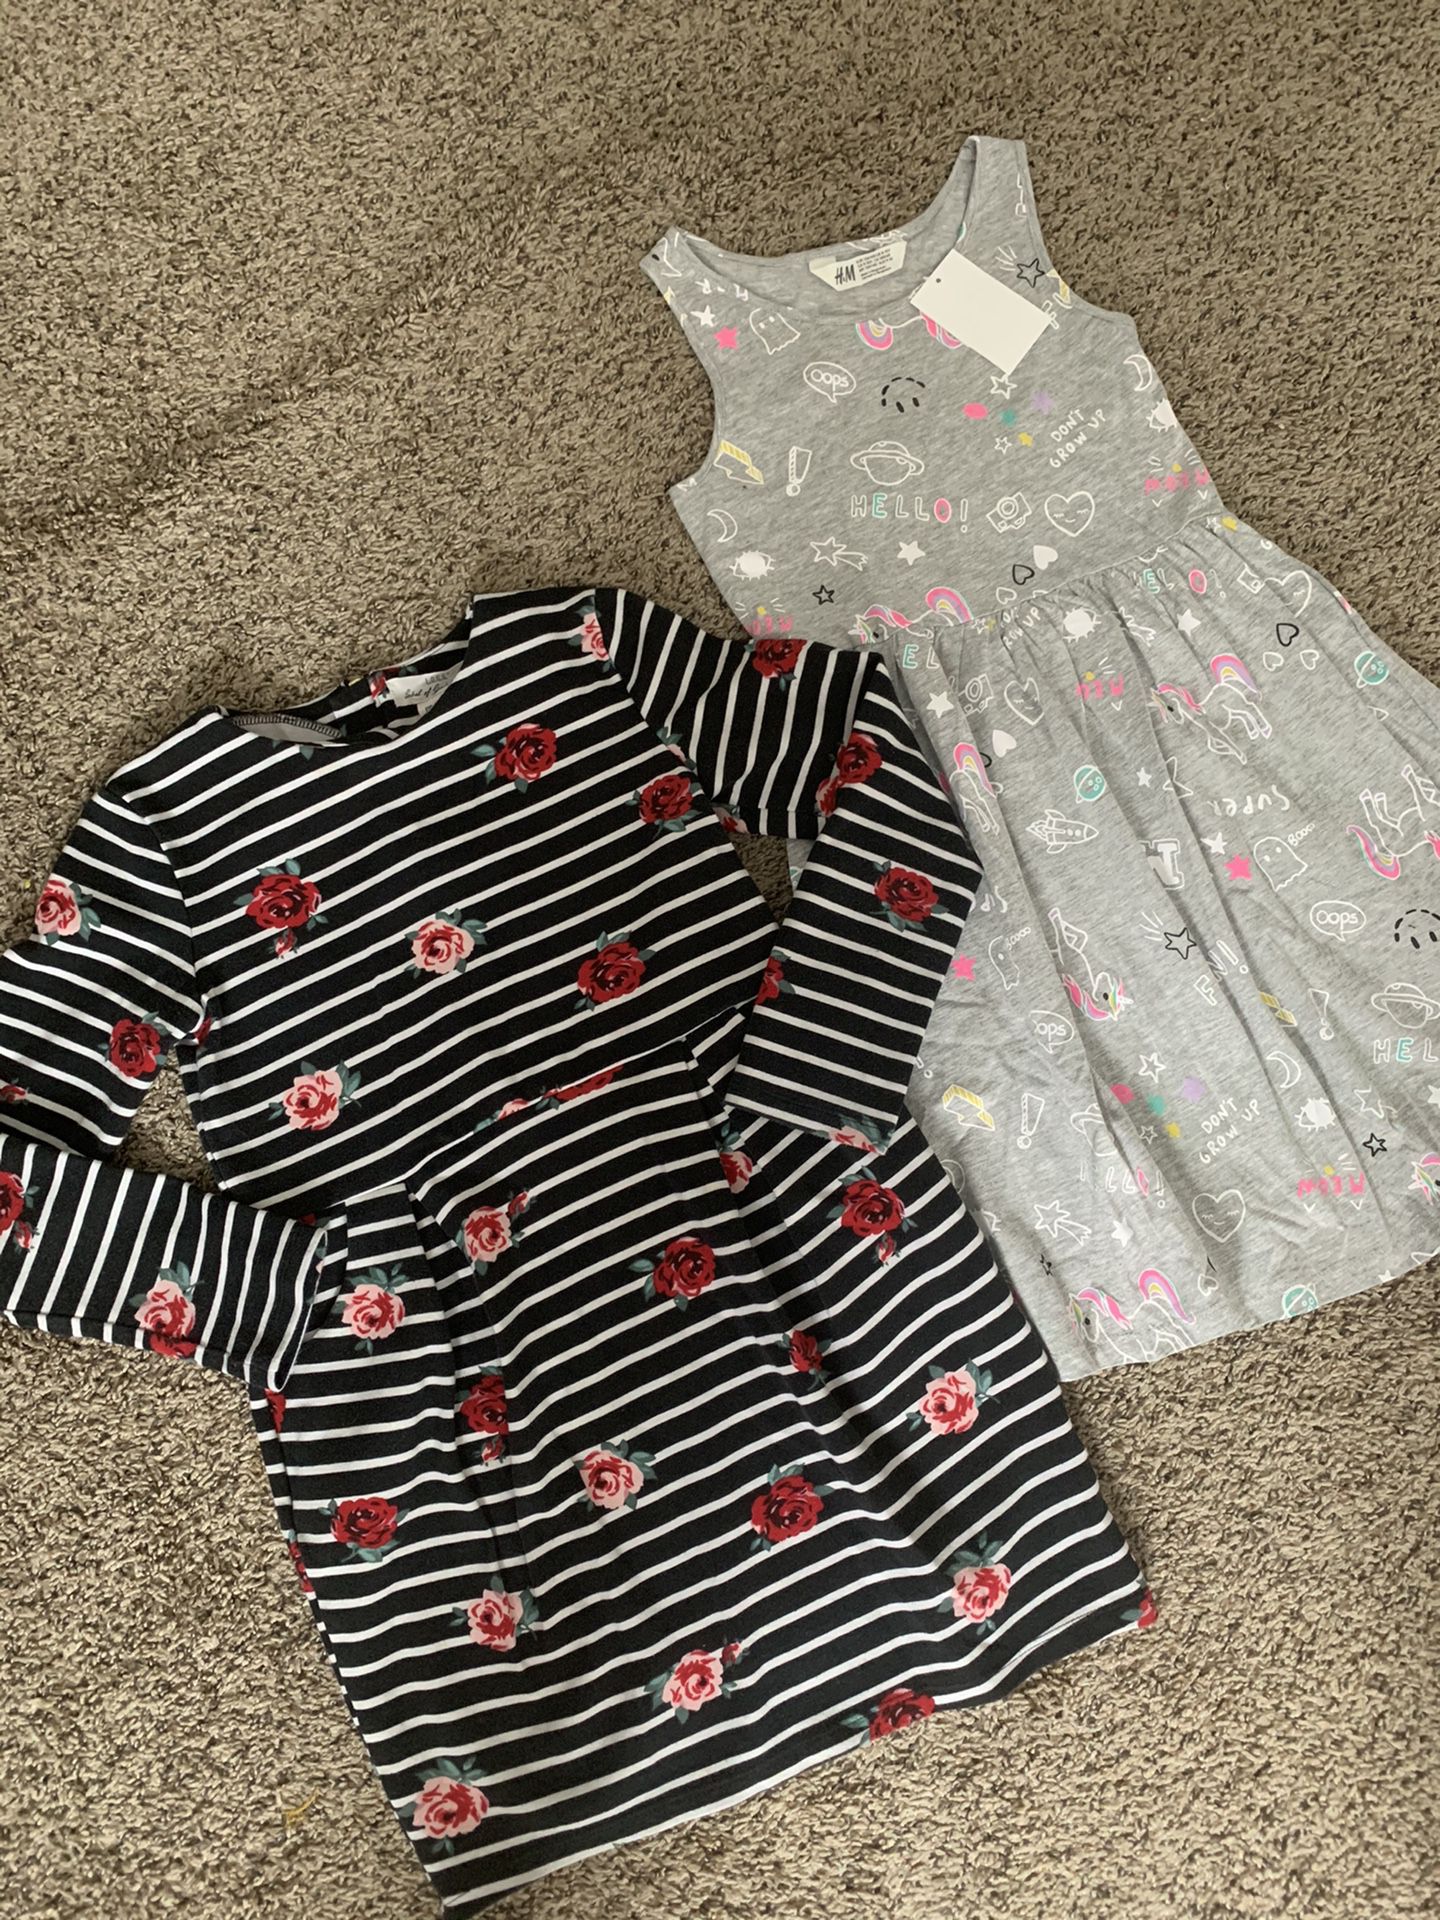 H&M flowers and unicorn dress for girls